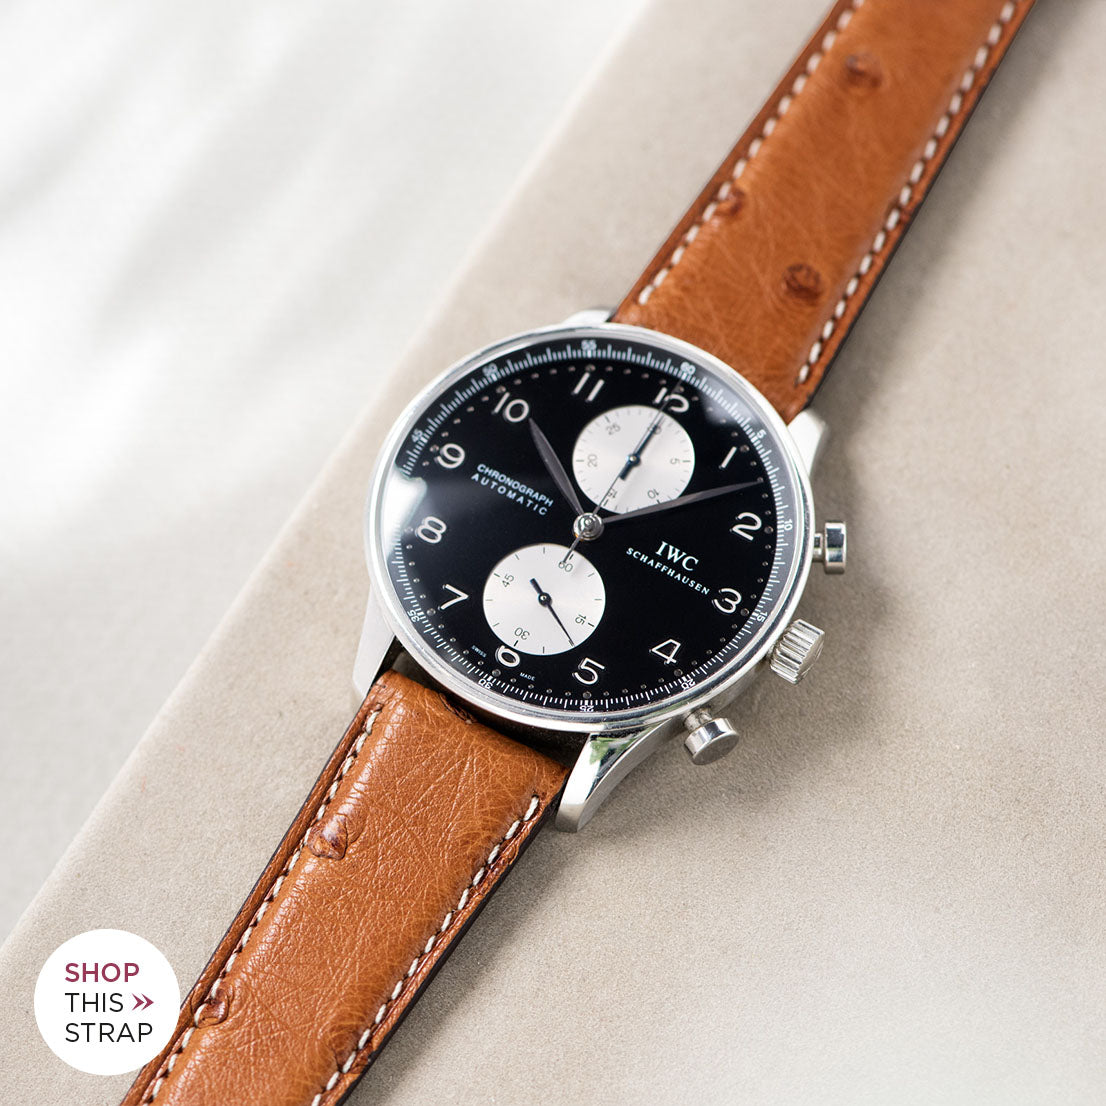 Bulang and Sons_Strap Guide_IWC-Portugieser_Cognac Brown Ostrich Leather Watch Strap